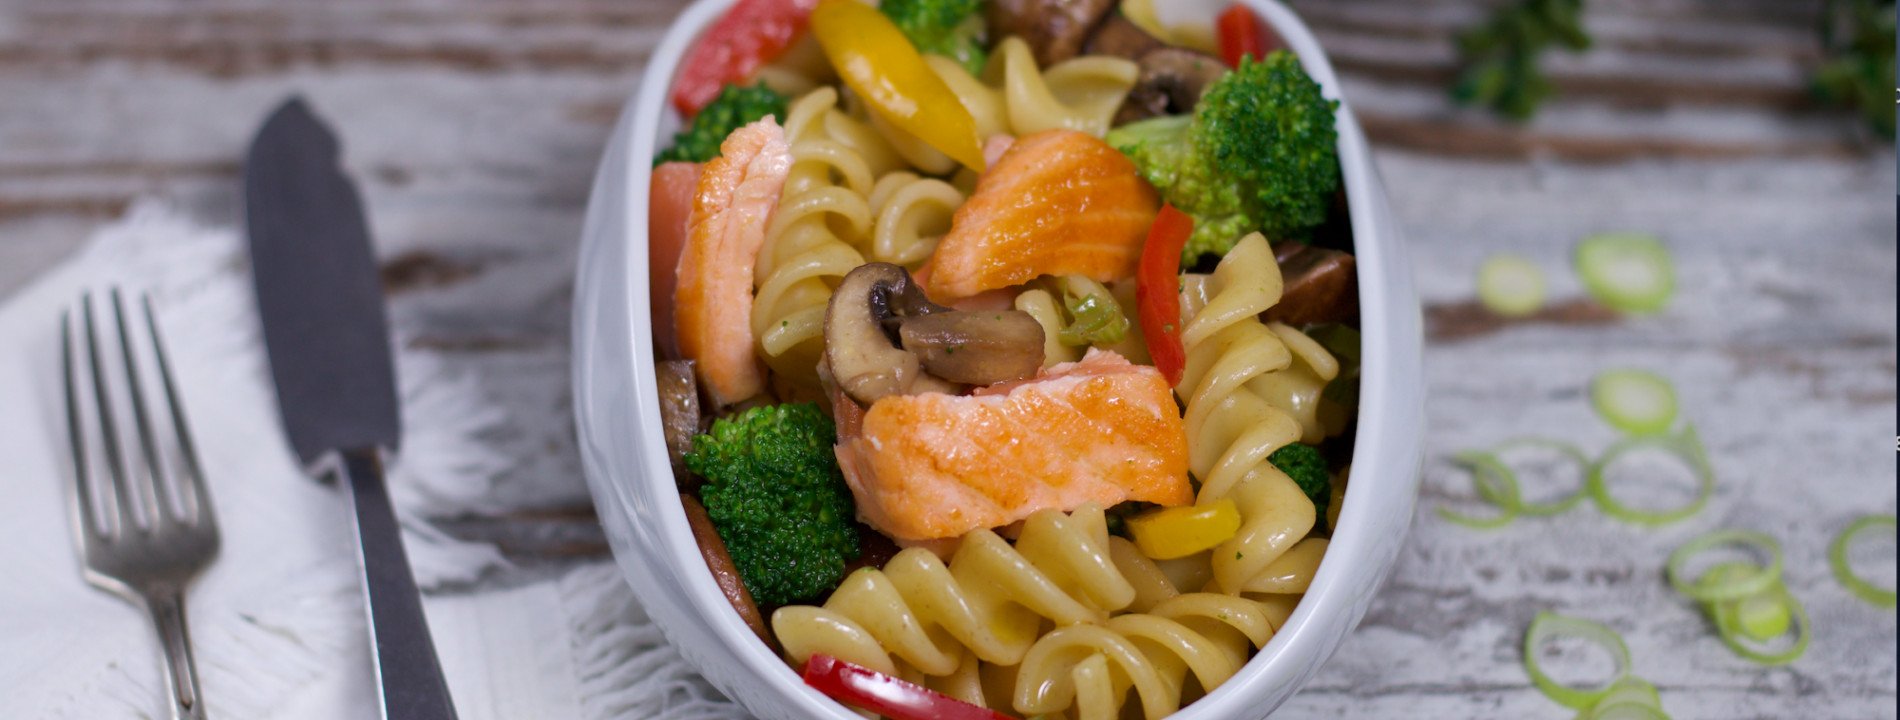 Wholemeal Pasta with Salmon